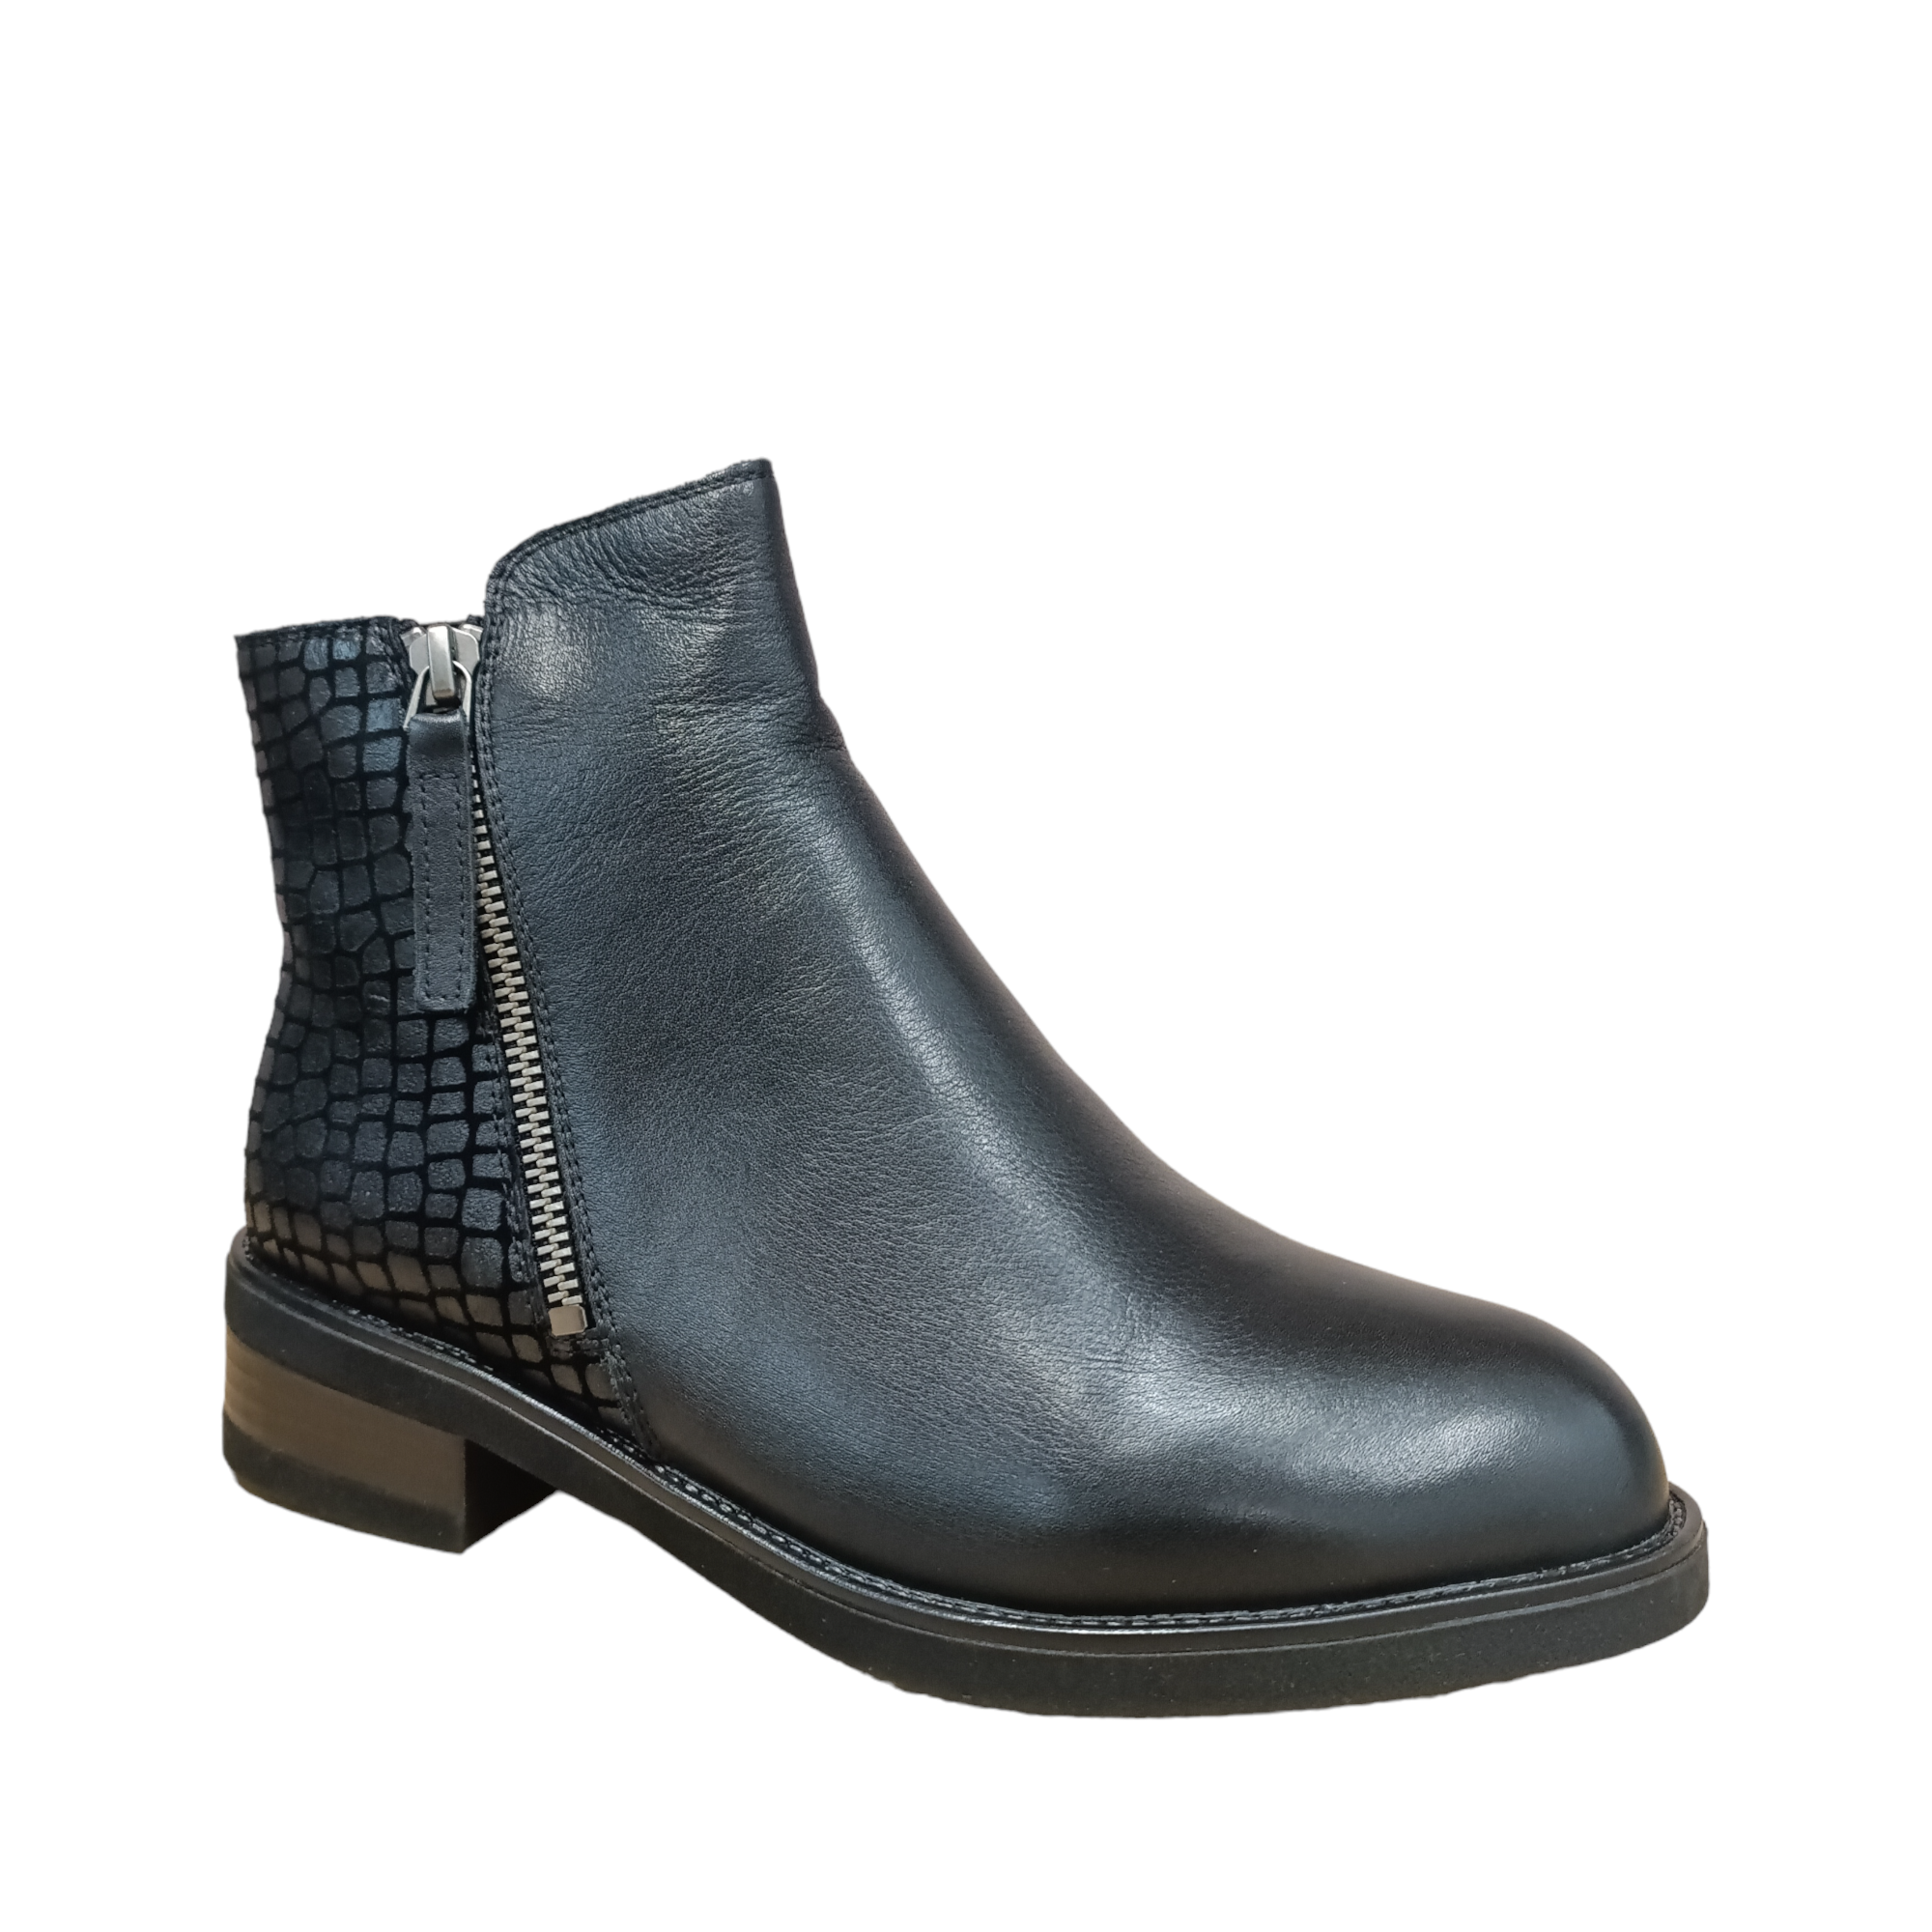 Dungeon Bresley Boots. Side angled boot with croc detailing on the heel and back of boot. Winter Leather boot. Shop Bresley Boots with shoe&me NZ